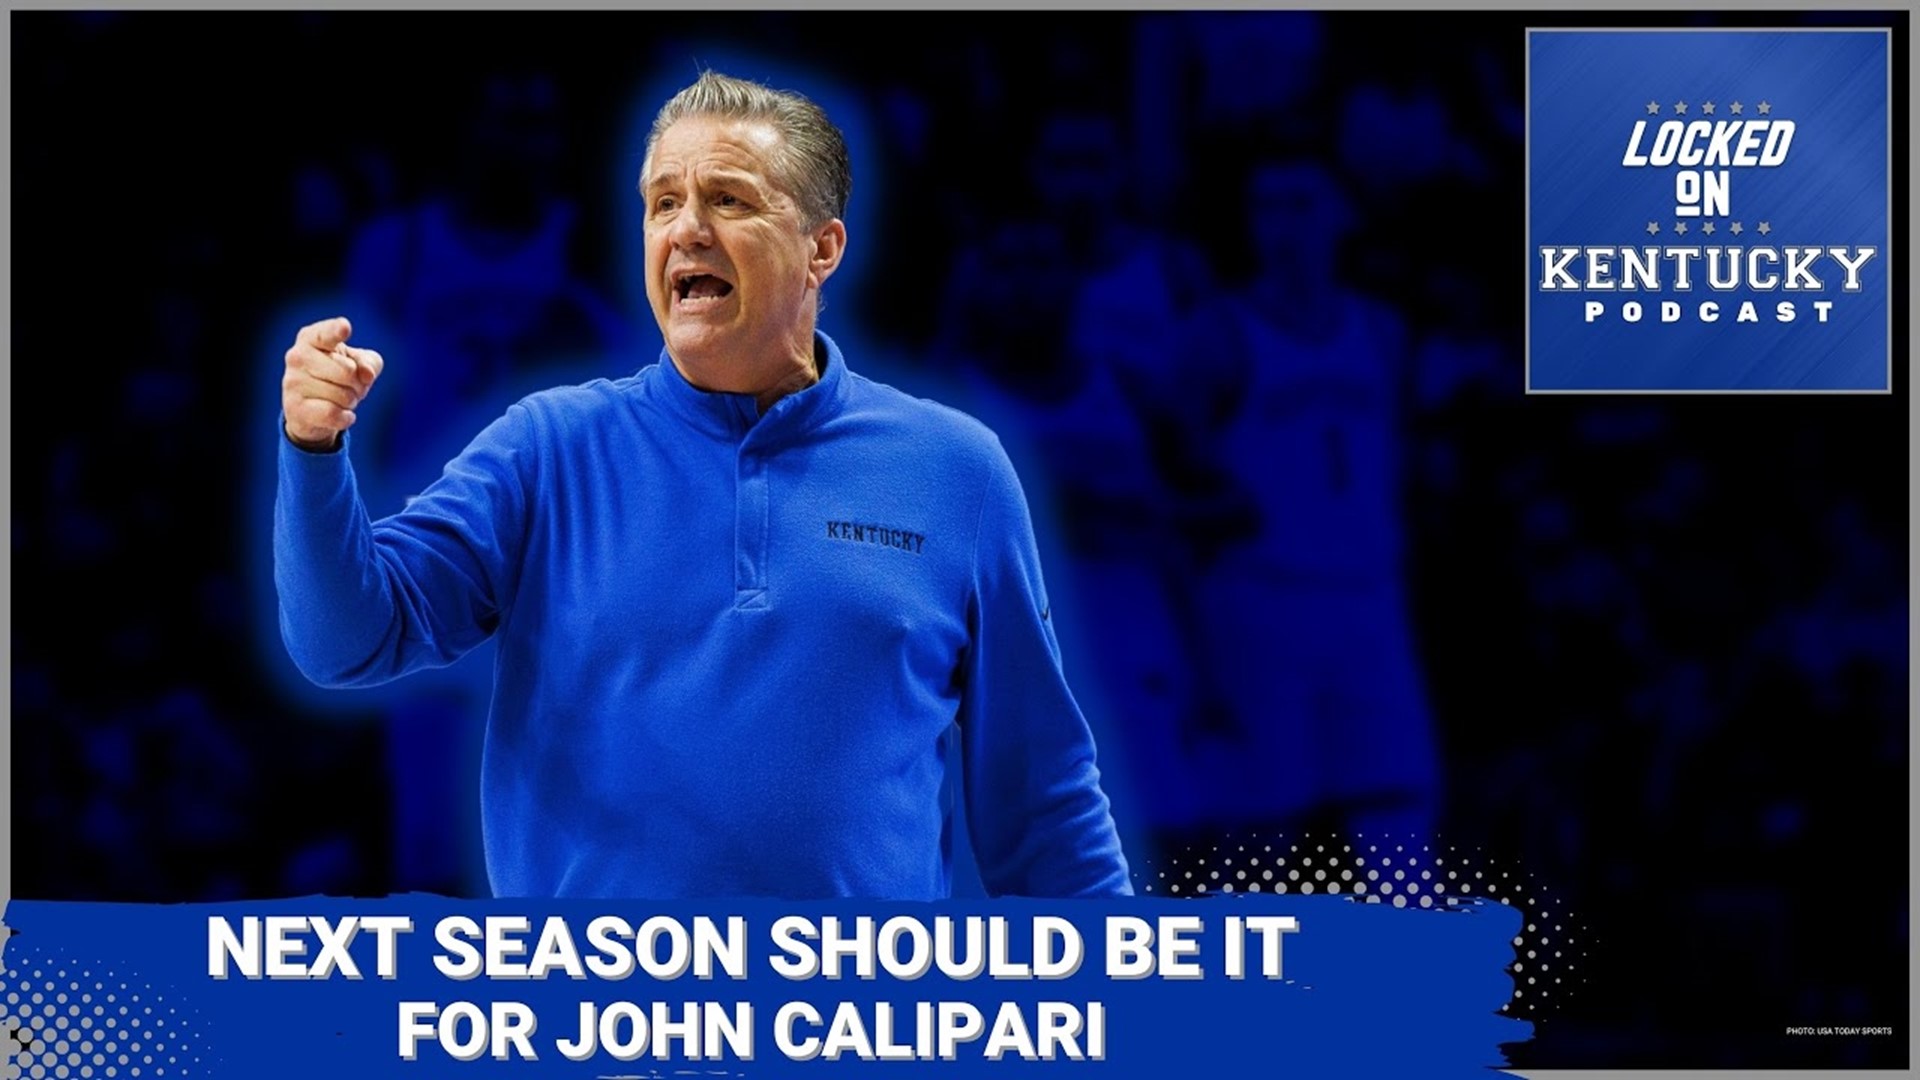 Should next year be it for John Calipari at Kentucky if the Wildcats don't meet expectations?